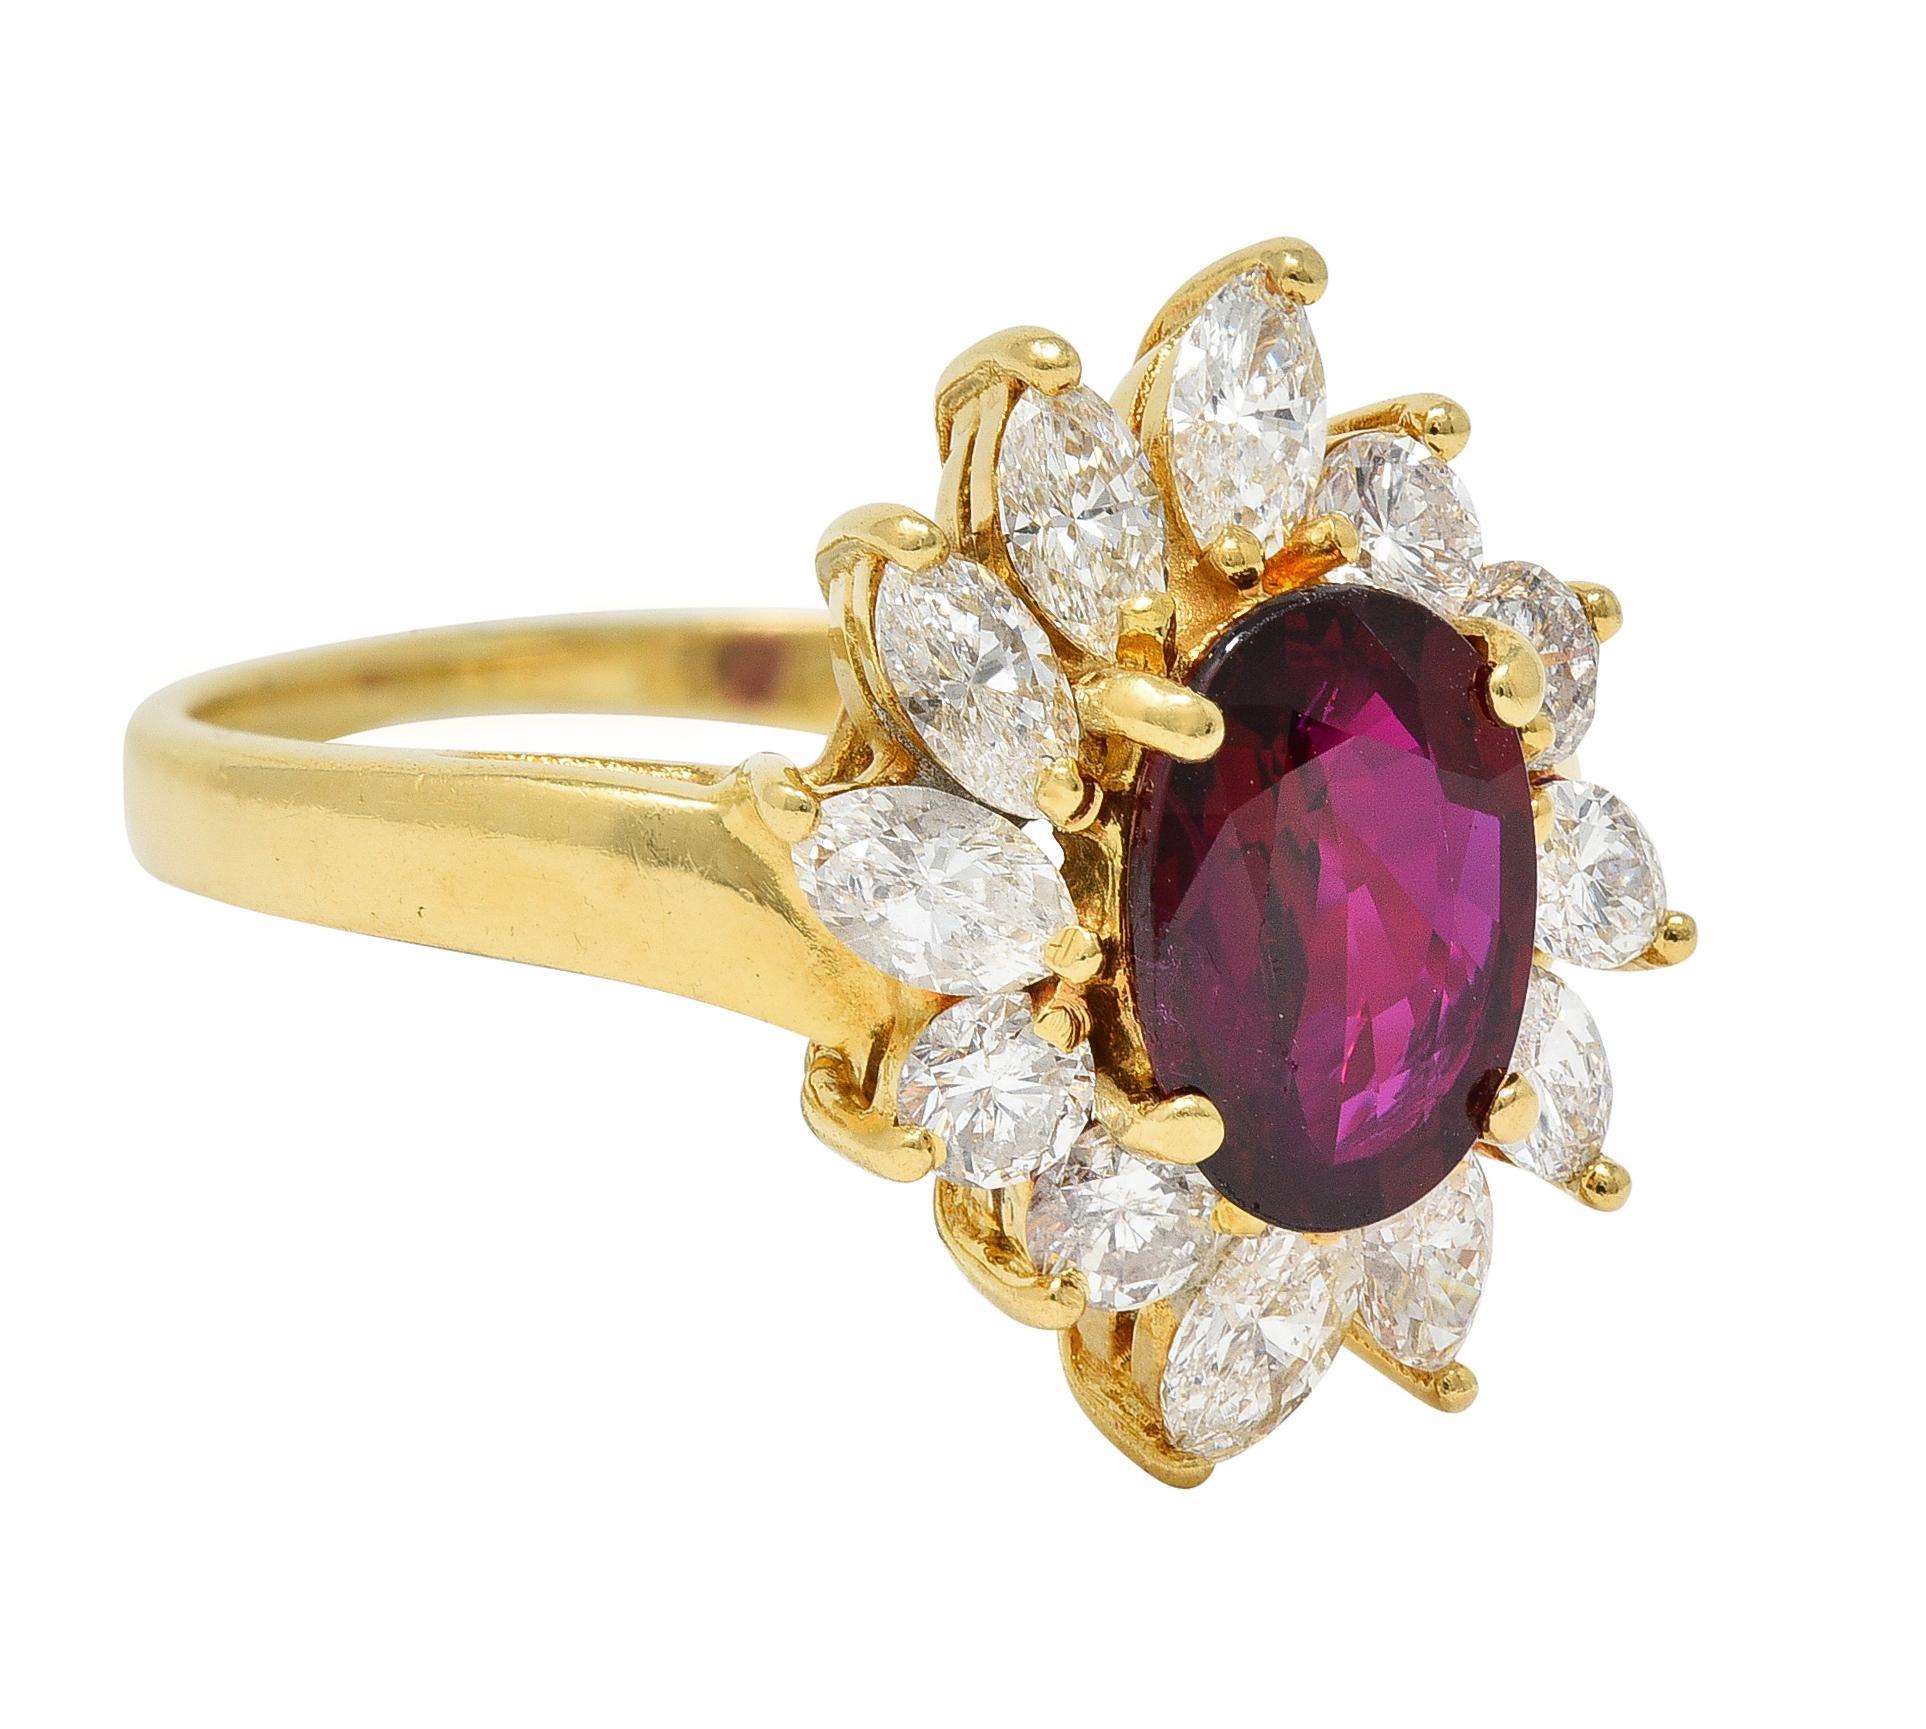 Centering an oval cut ruby weighing 1.15 carats total - transparent royal red in color
Natural Thai in origin with indications of minor heat treatment - prong set
With a surround of marquise and round brilliant cut diamonds 
Weighing approximately